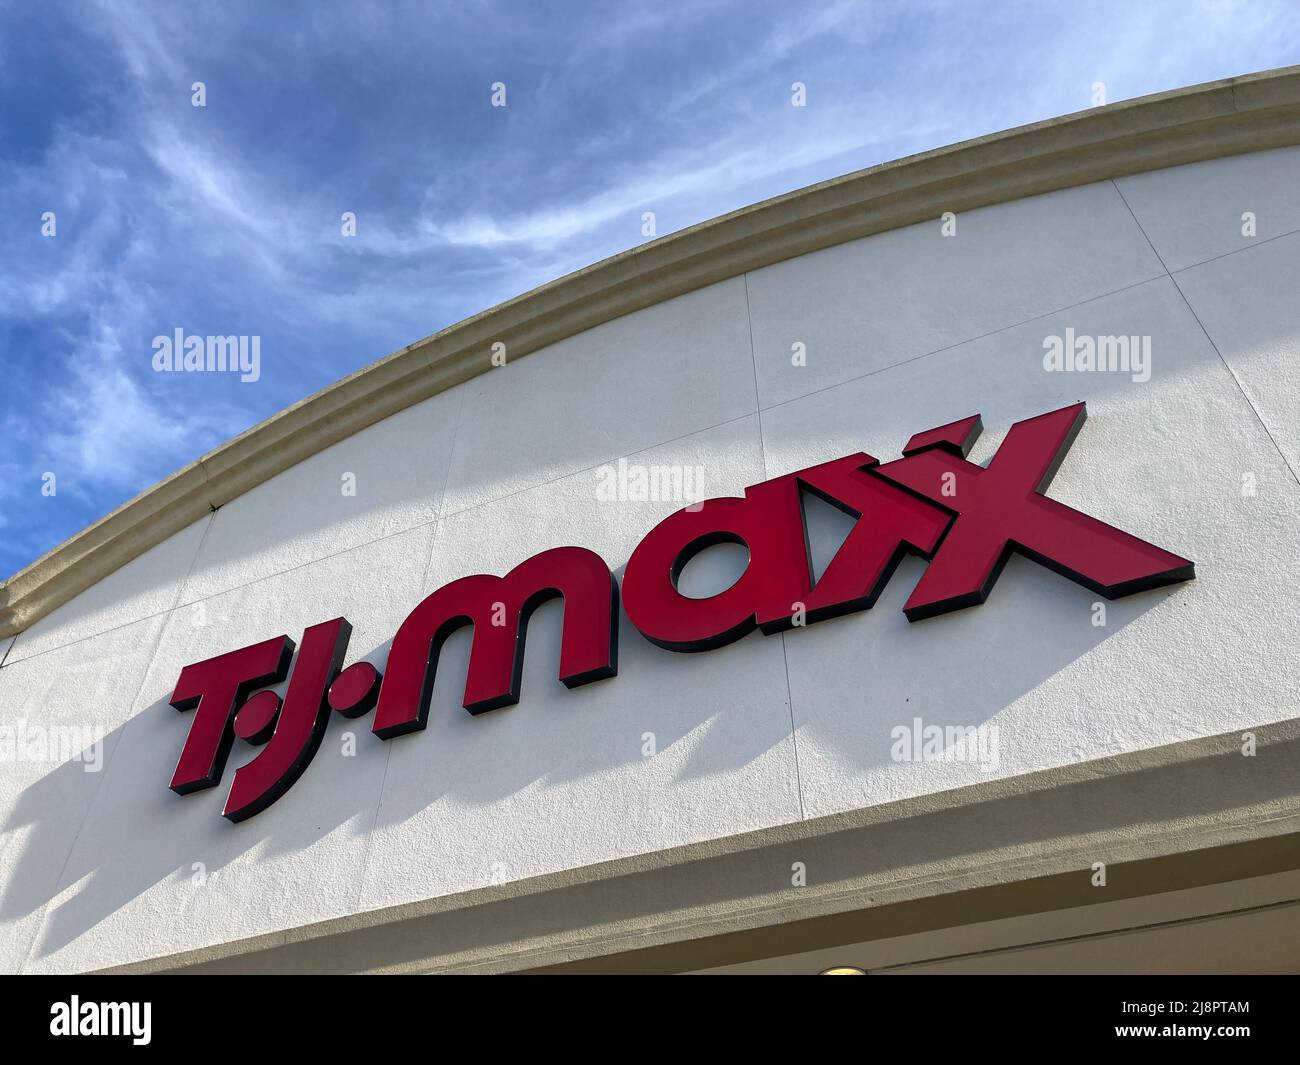 Looking up at TJ Maxx department store logo. TJ Maxx is an American department store chain is one of the largest clothing retailers in the United Stat Stock Photo